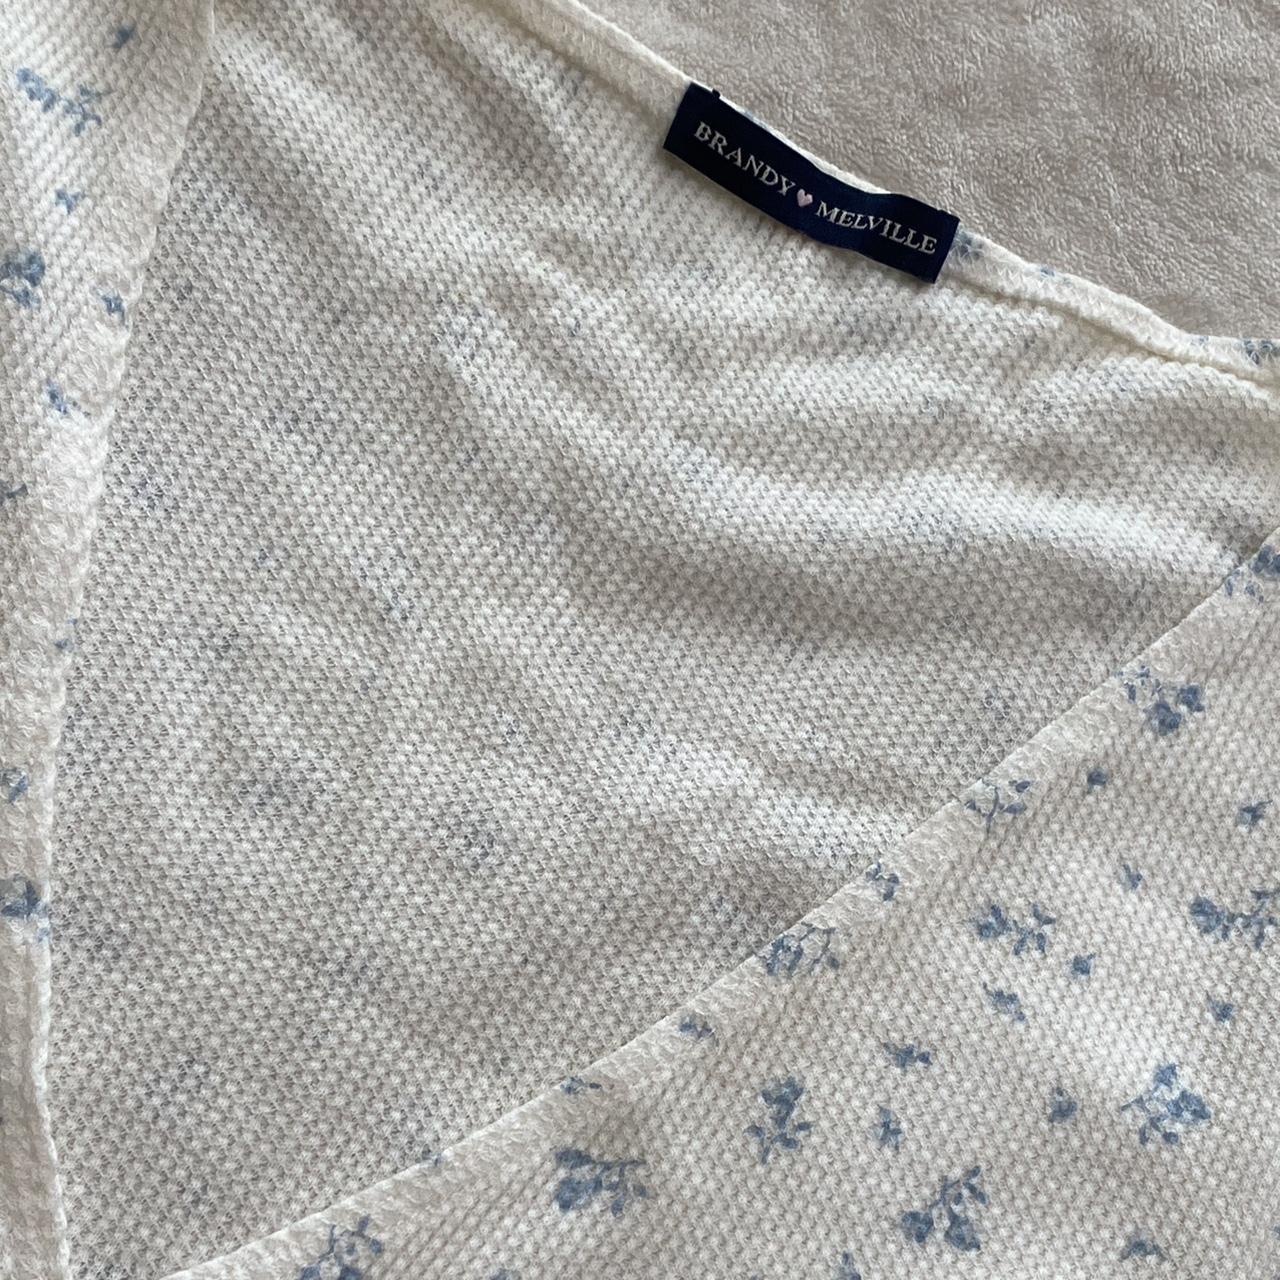 Brandy Melville Coco Top One size Can be worn... - Depop